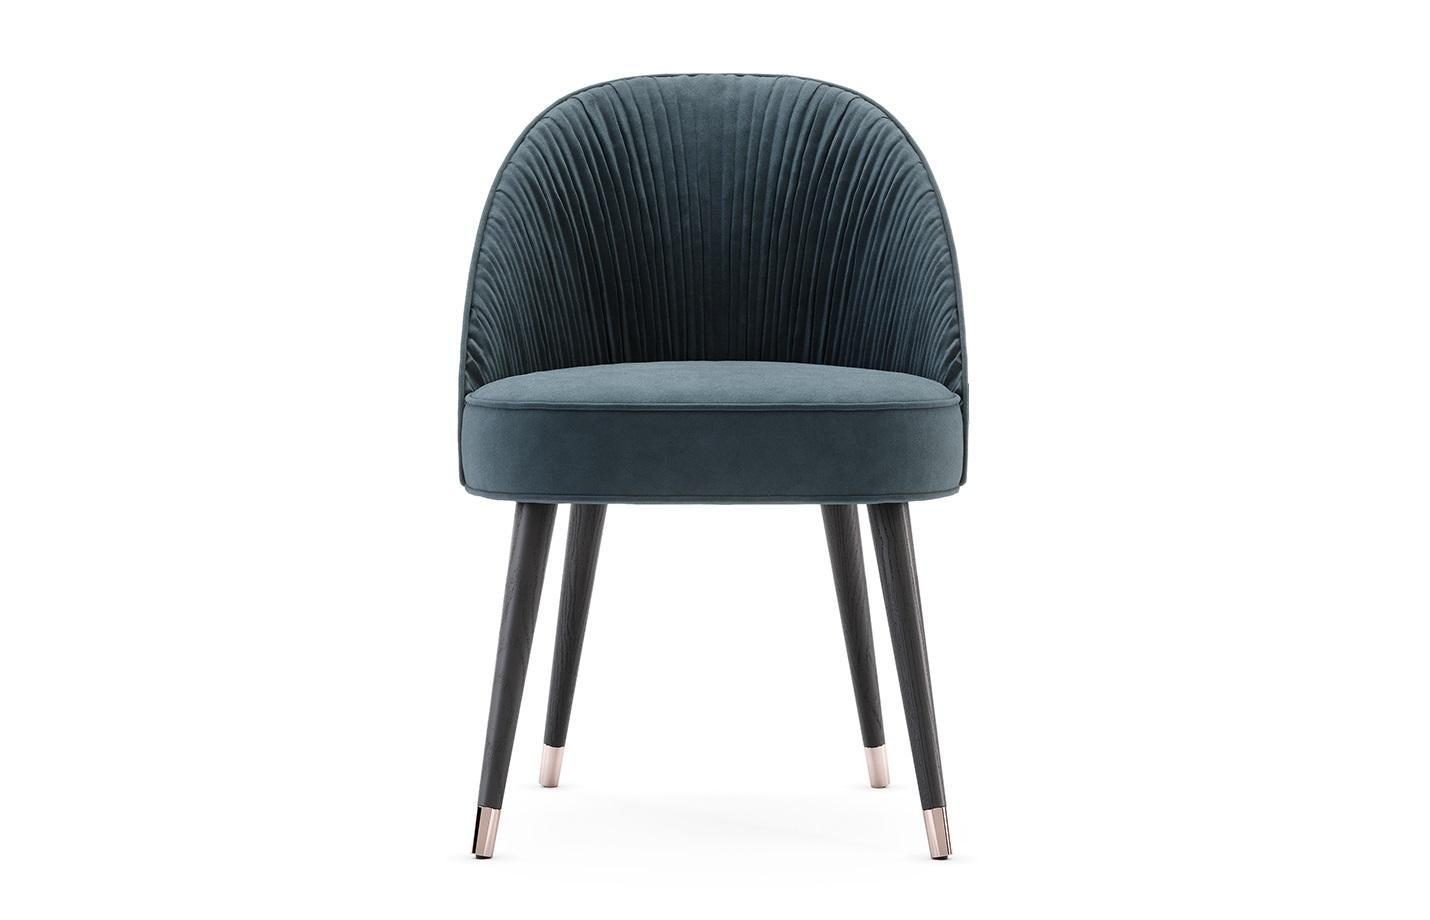 The contemporary dining chair hold a stimulating design, as they hold an elegant combination of handmade couture techniques, wood, and metal. Their shapes are inspired by the unique French couture and each detail will elegantly flow inside of an